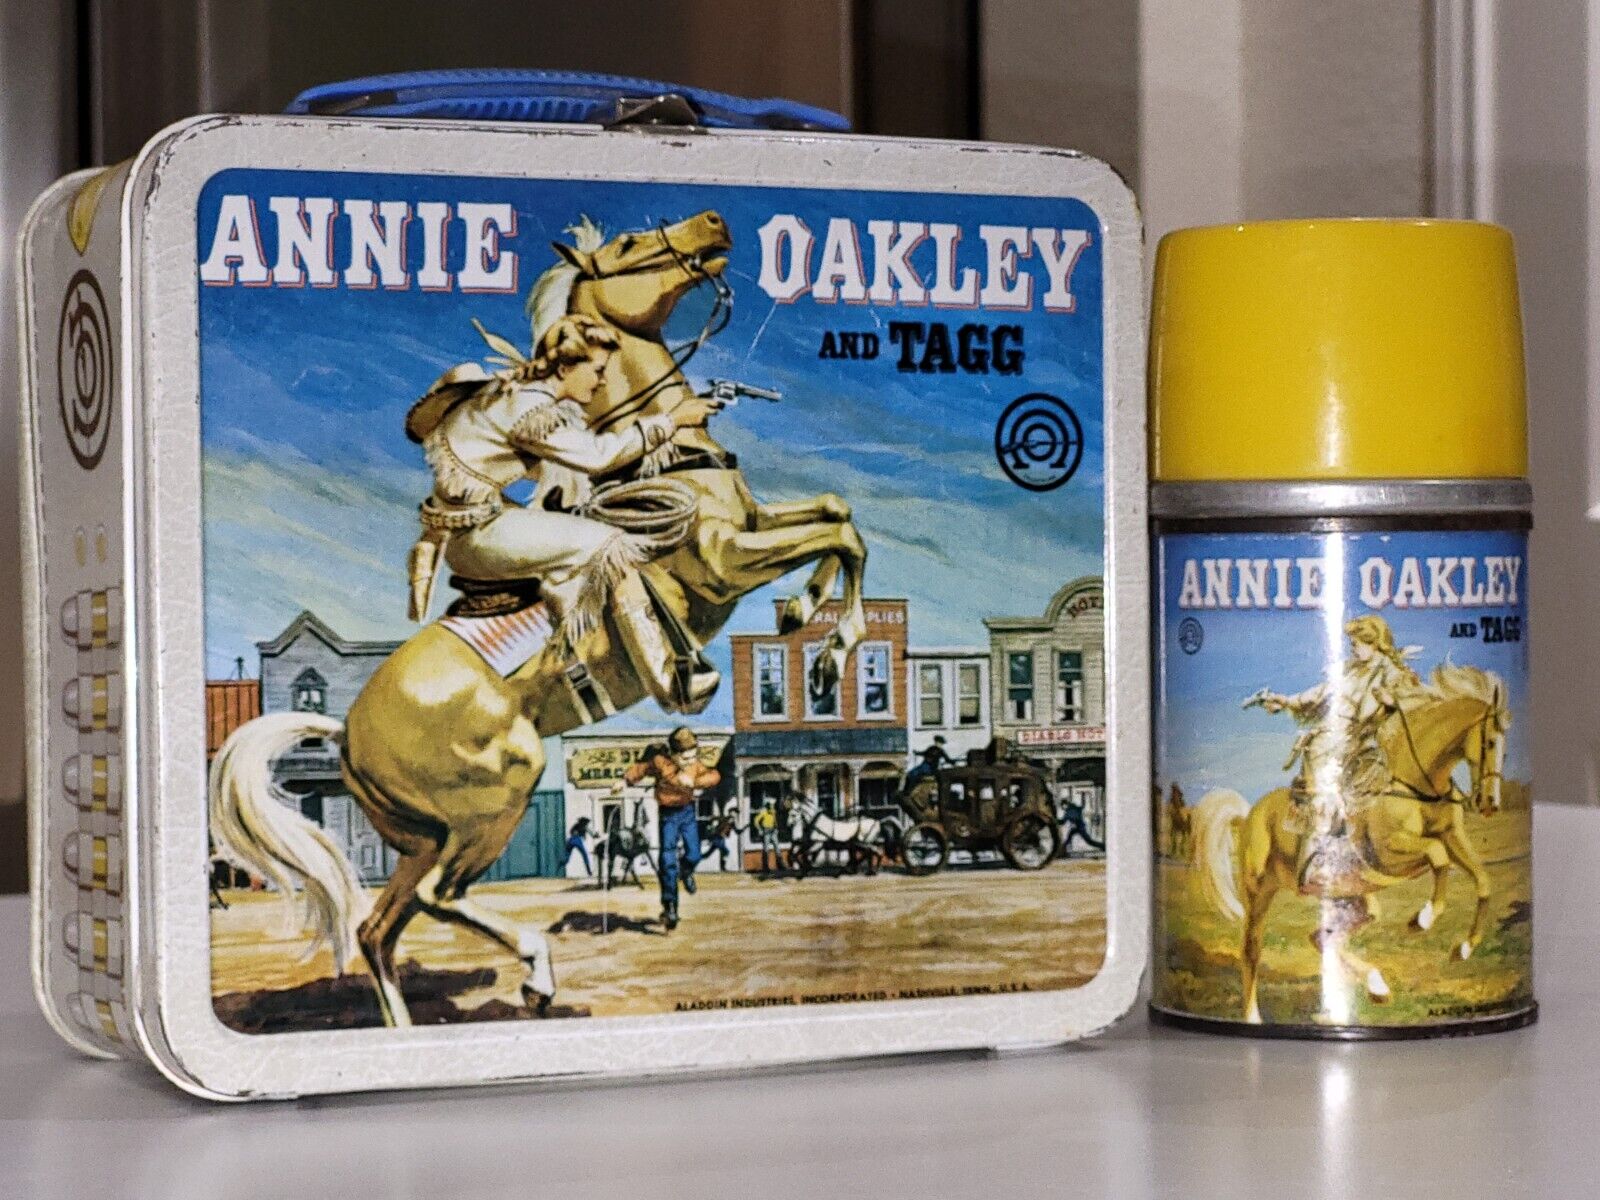 Vintage Annie Oakley and Tagg Lunch Box and Thermos - 1955 Aladdin